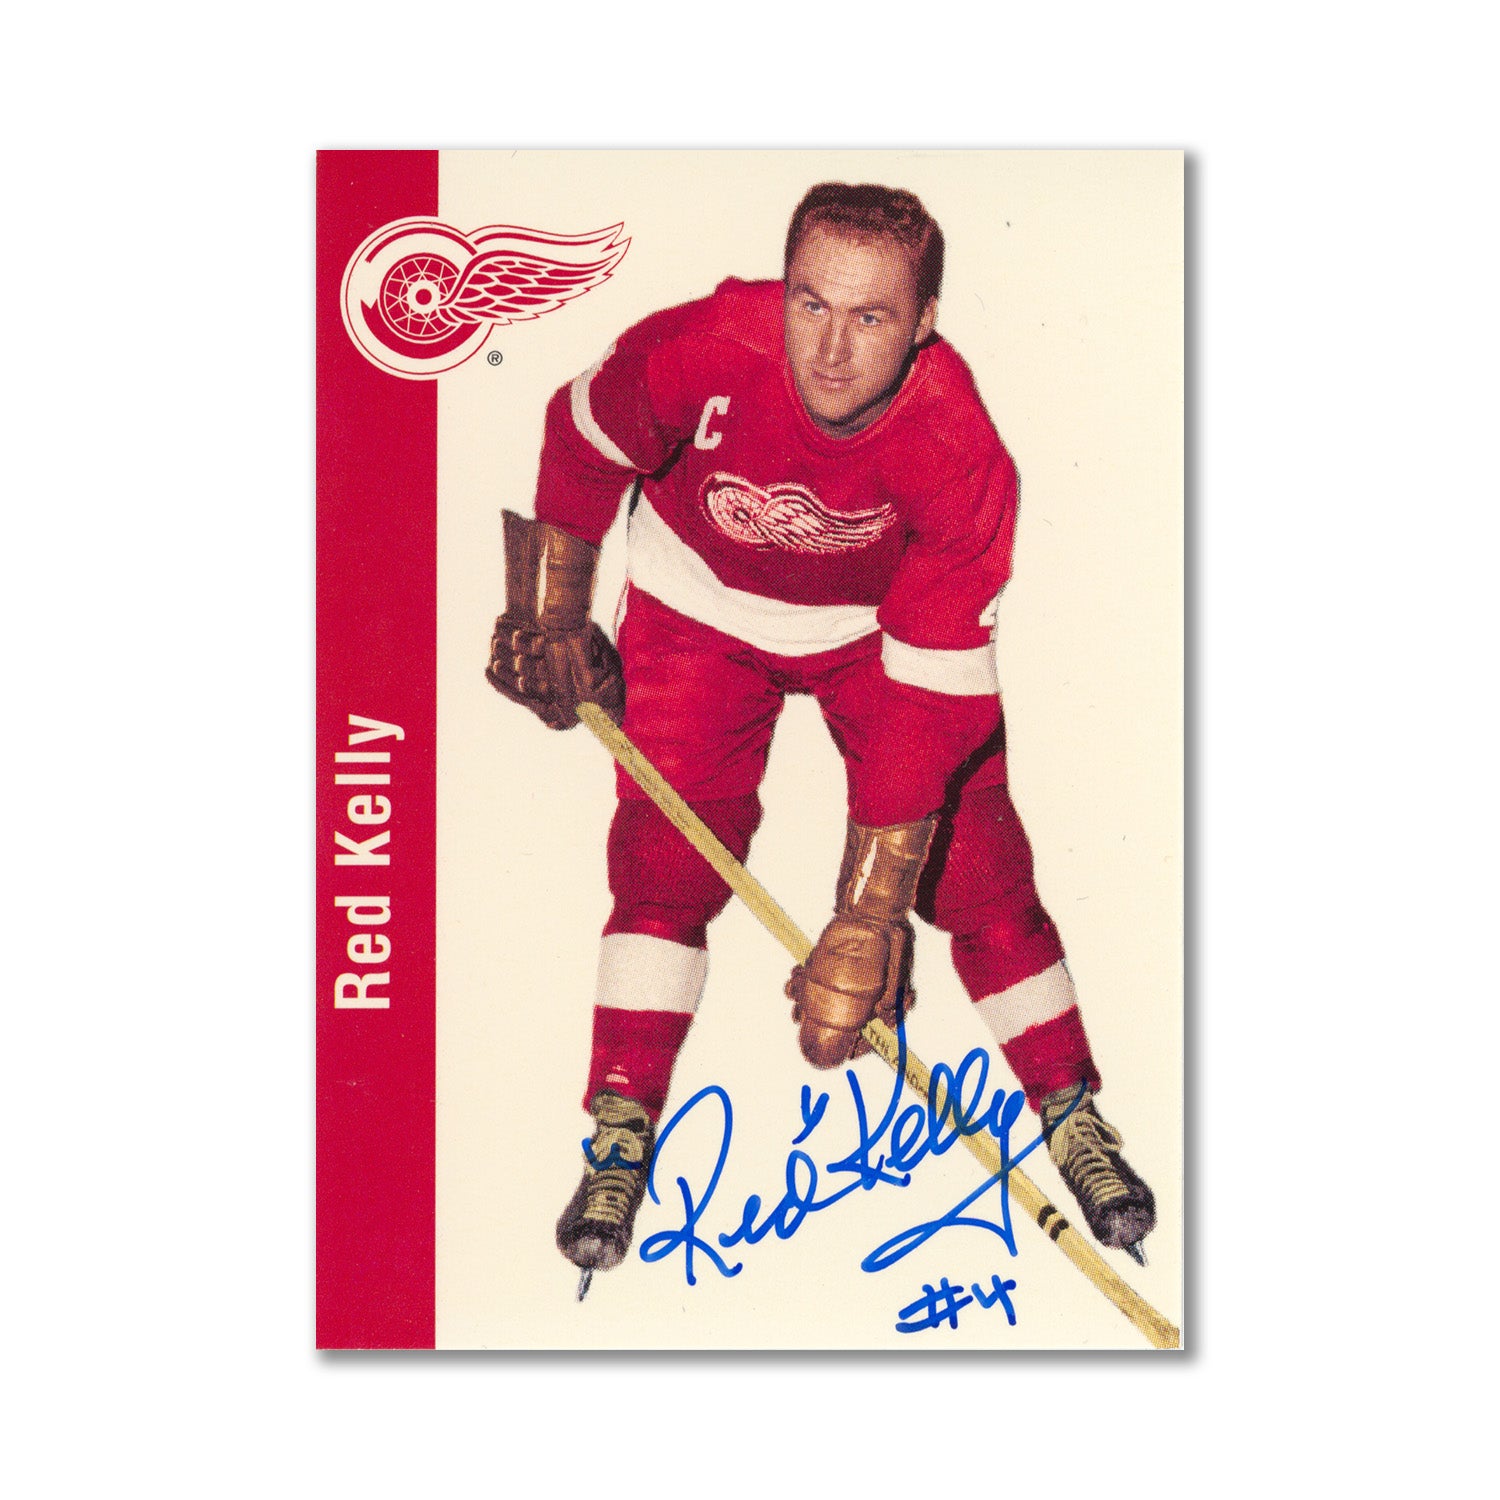 Autographed 1994 Parkhurst Missing Link #52 Red Kelly Hockey Card